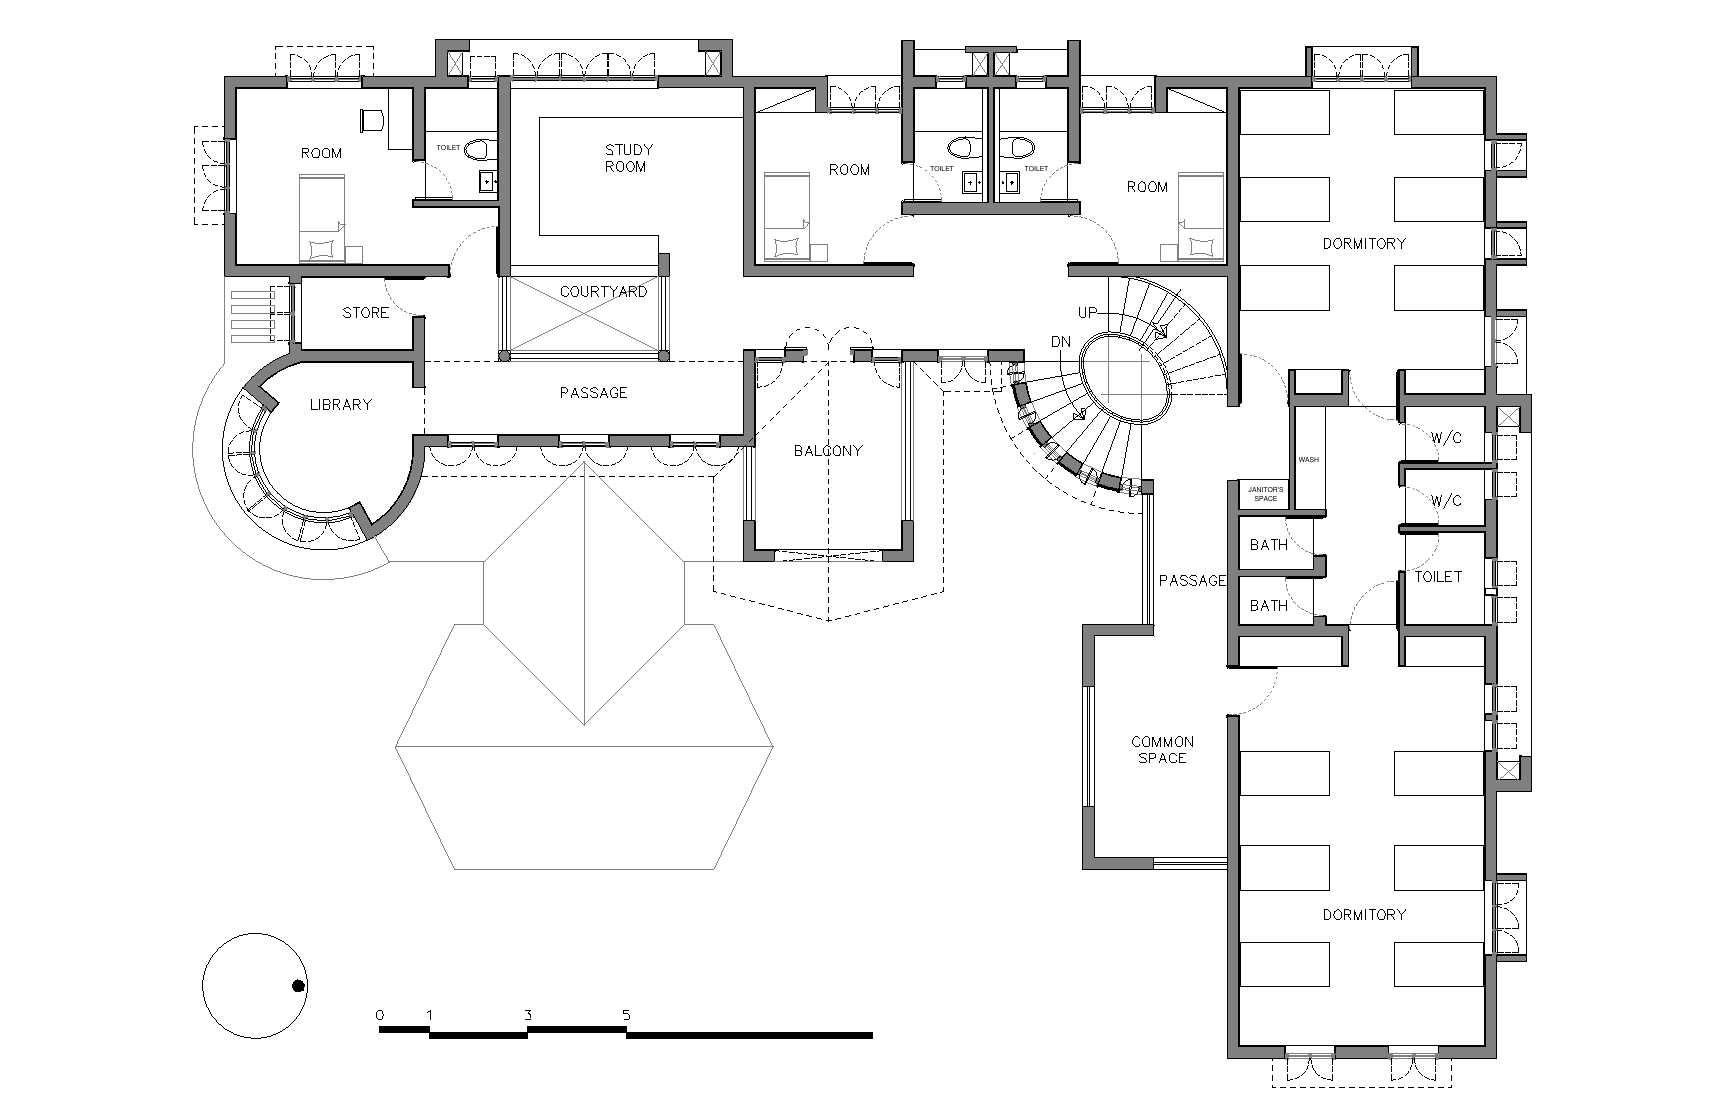 First Floor Plan of Gril's Home